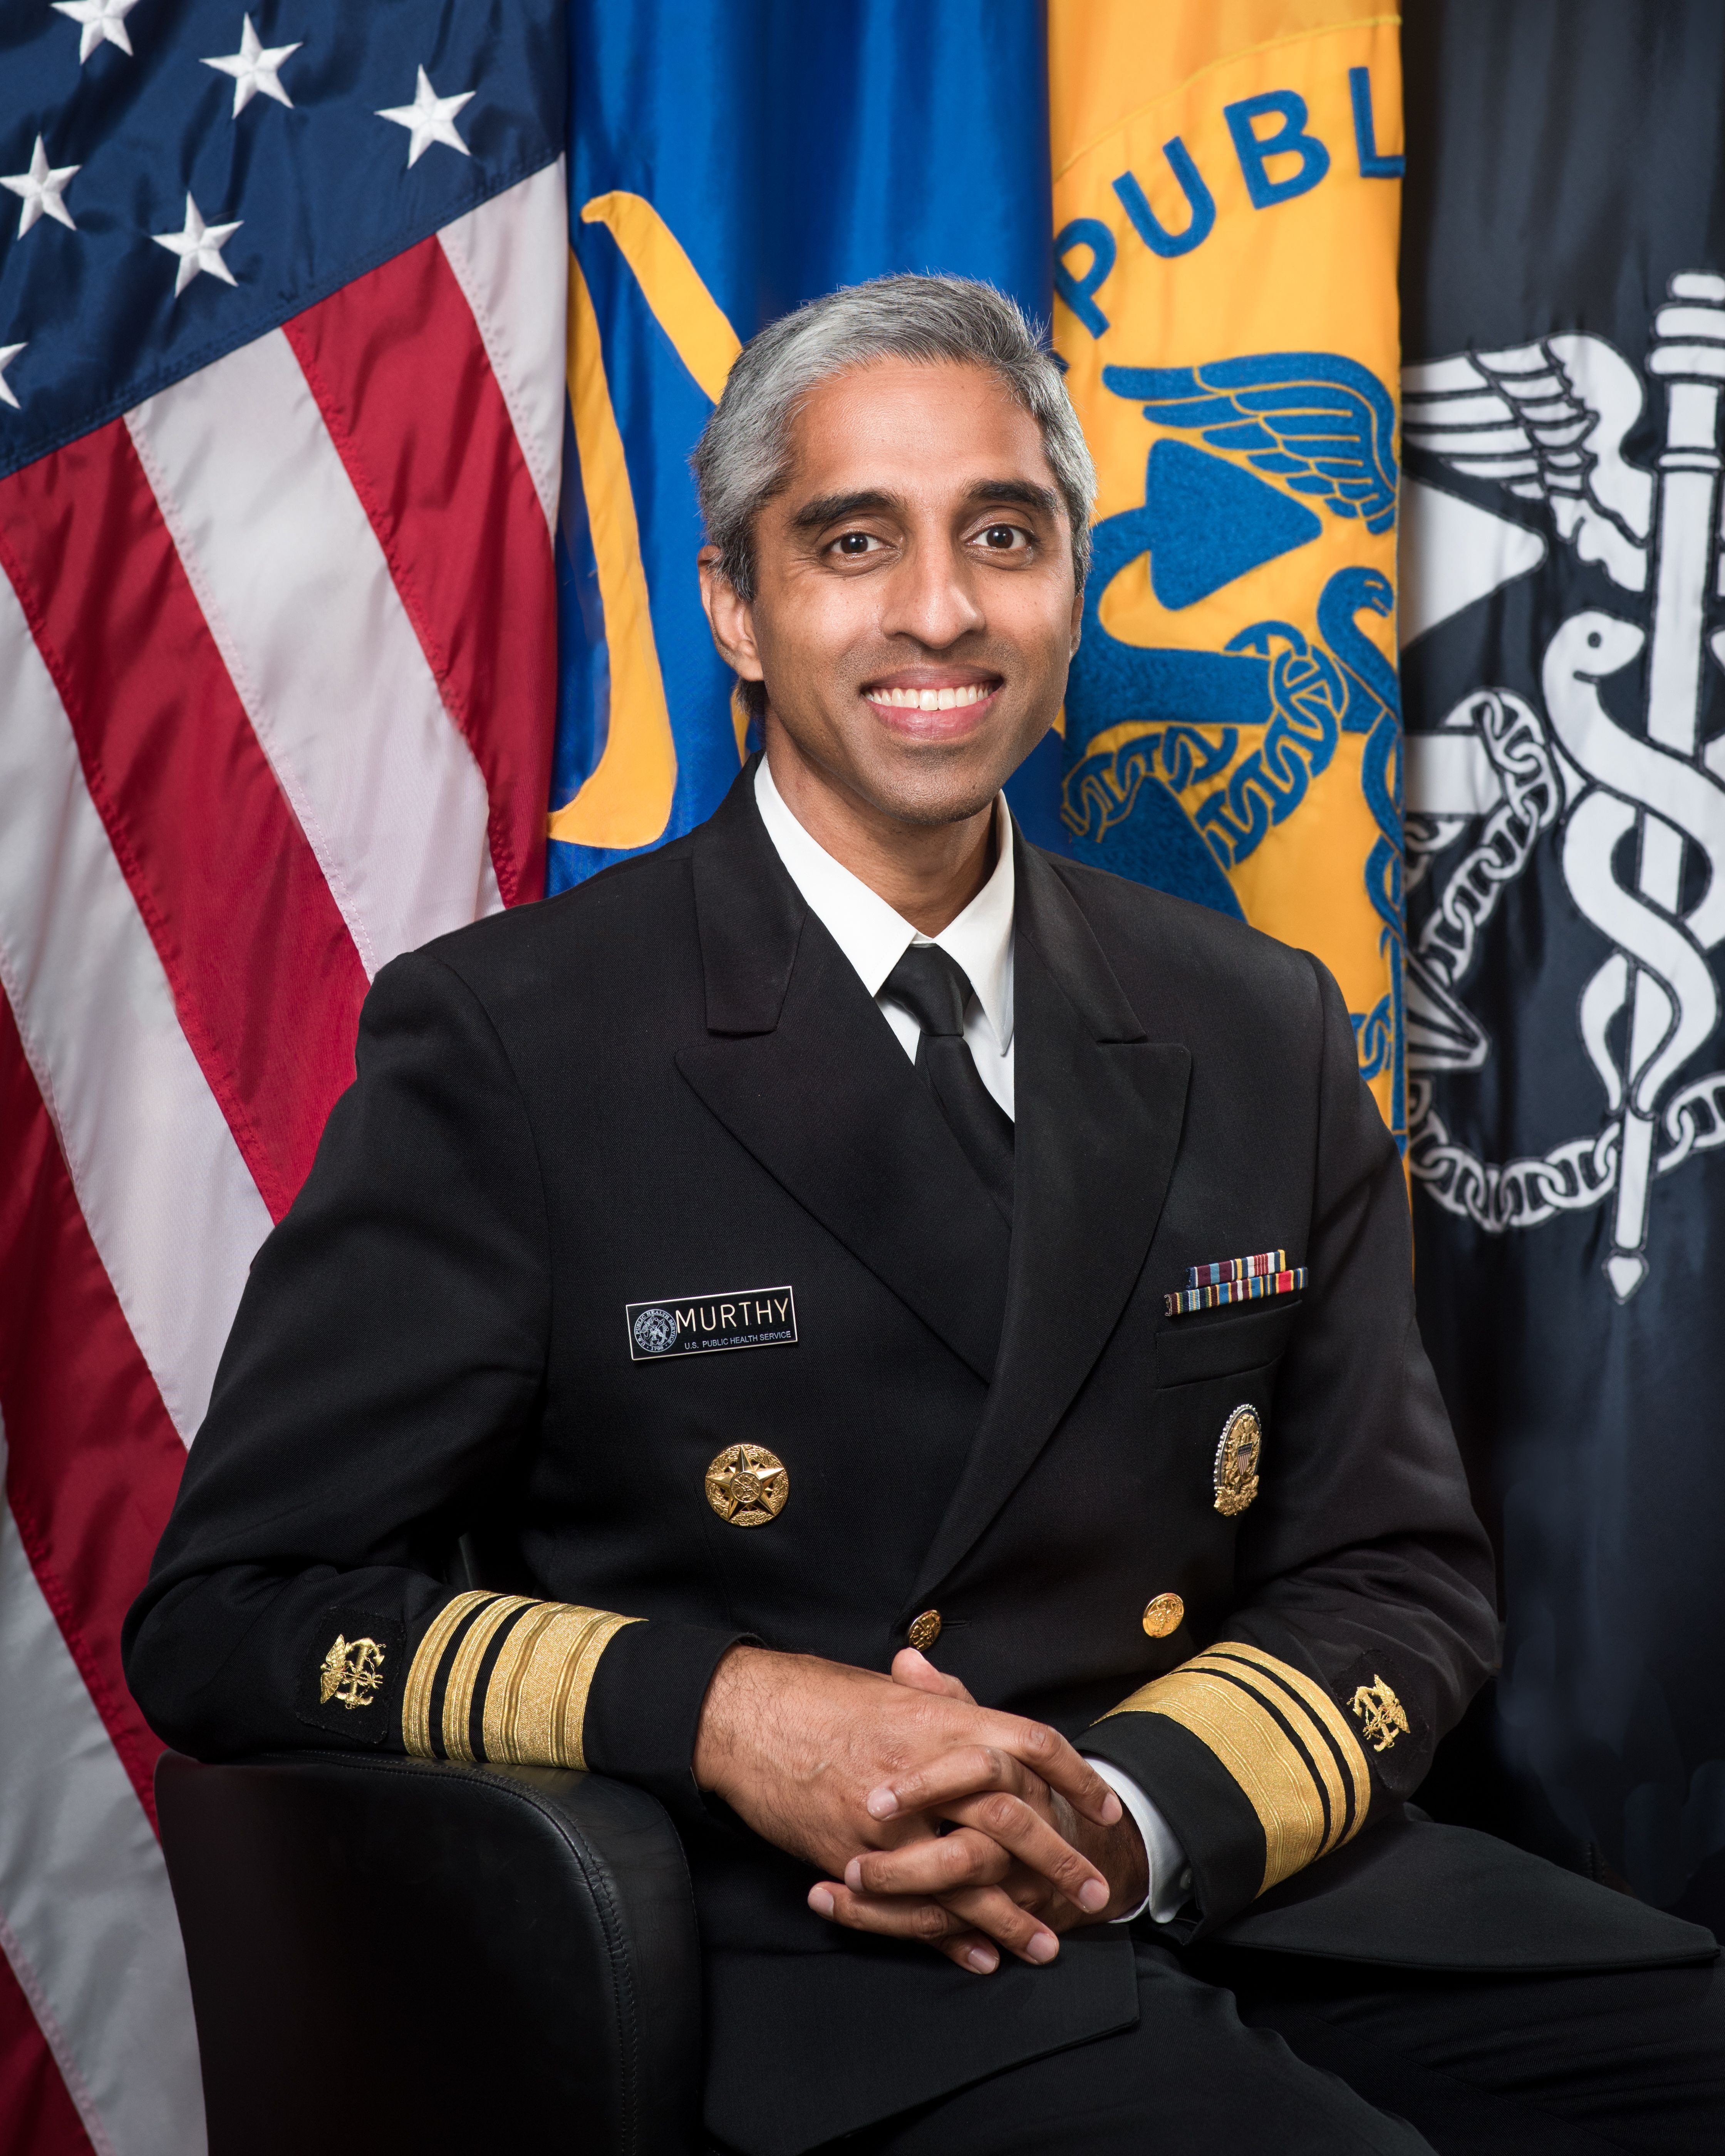 A Community Conversation with the U.S. Surgeon General